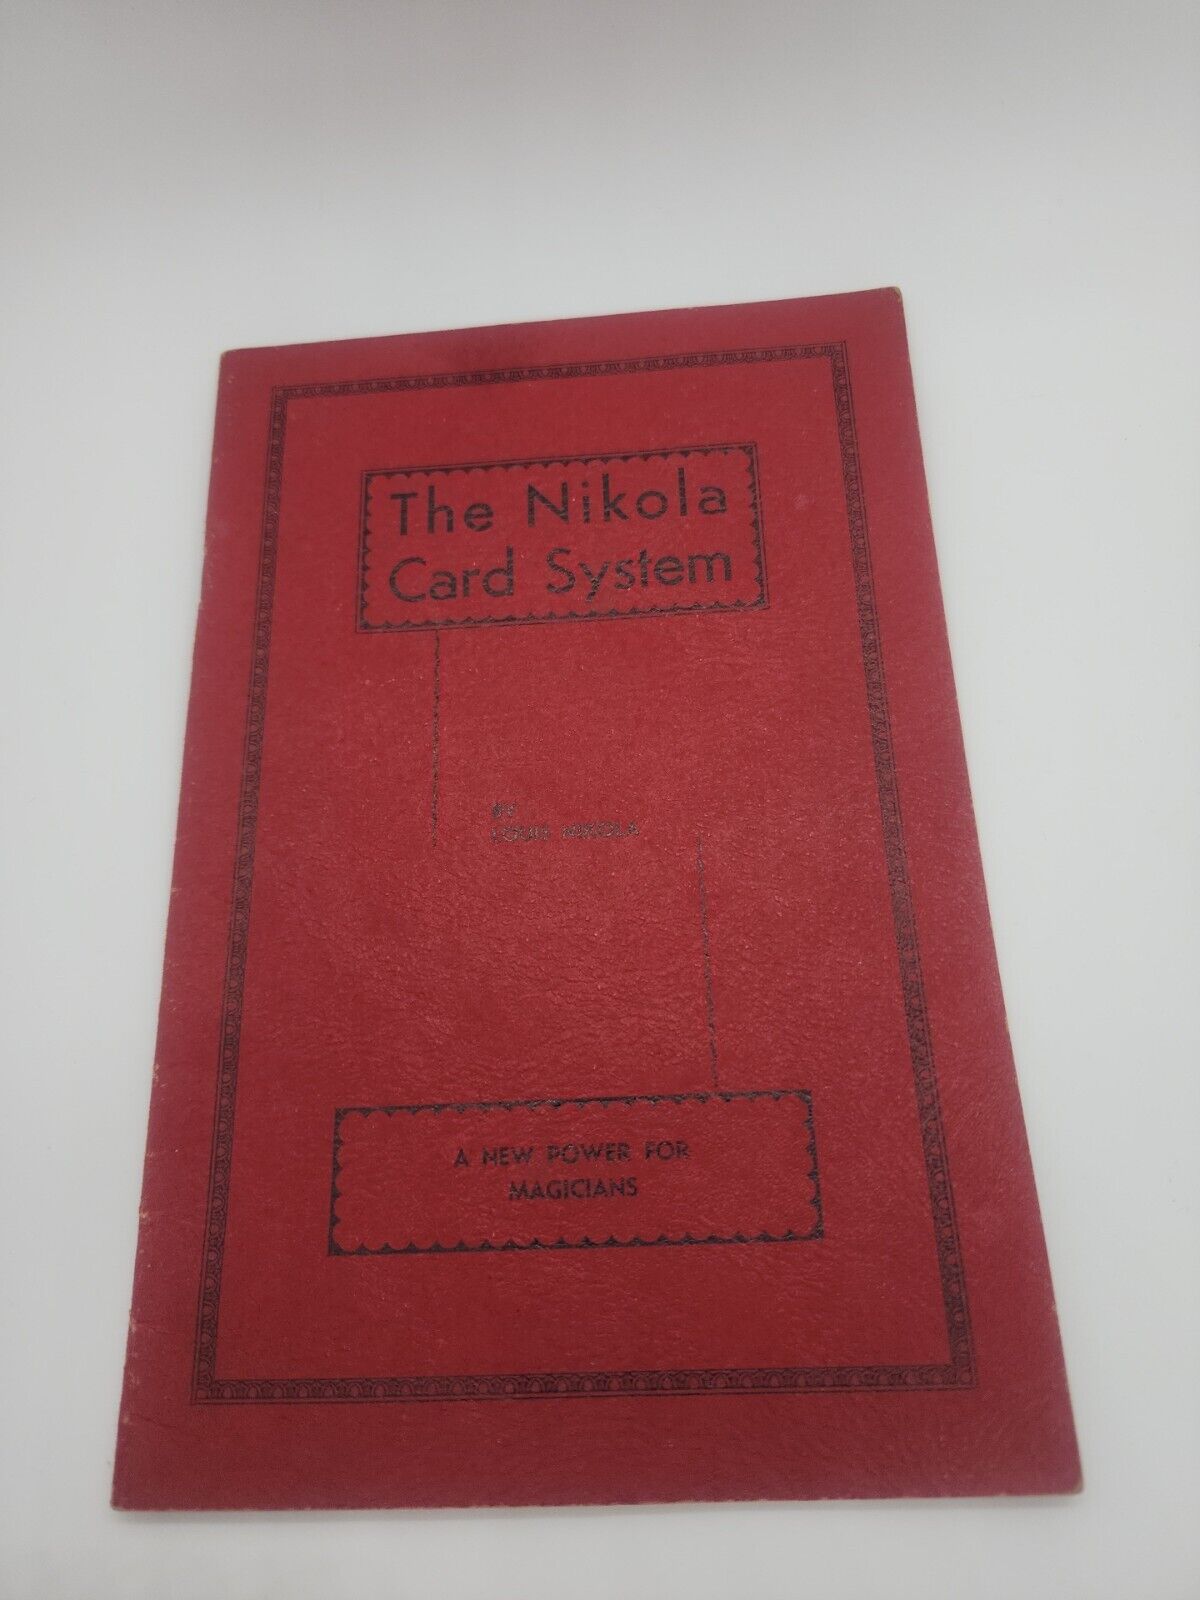 Vintage 1937 Magic Book The Louis Nikola Card System New Power for Magicians